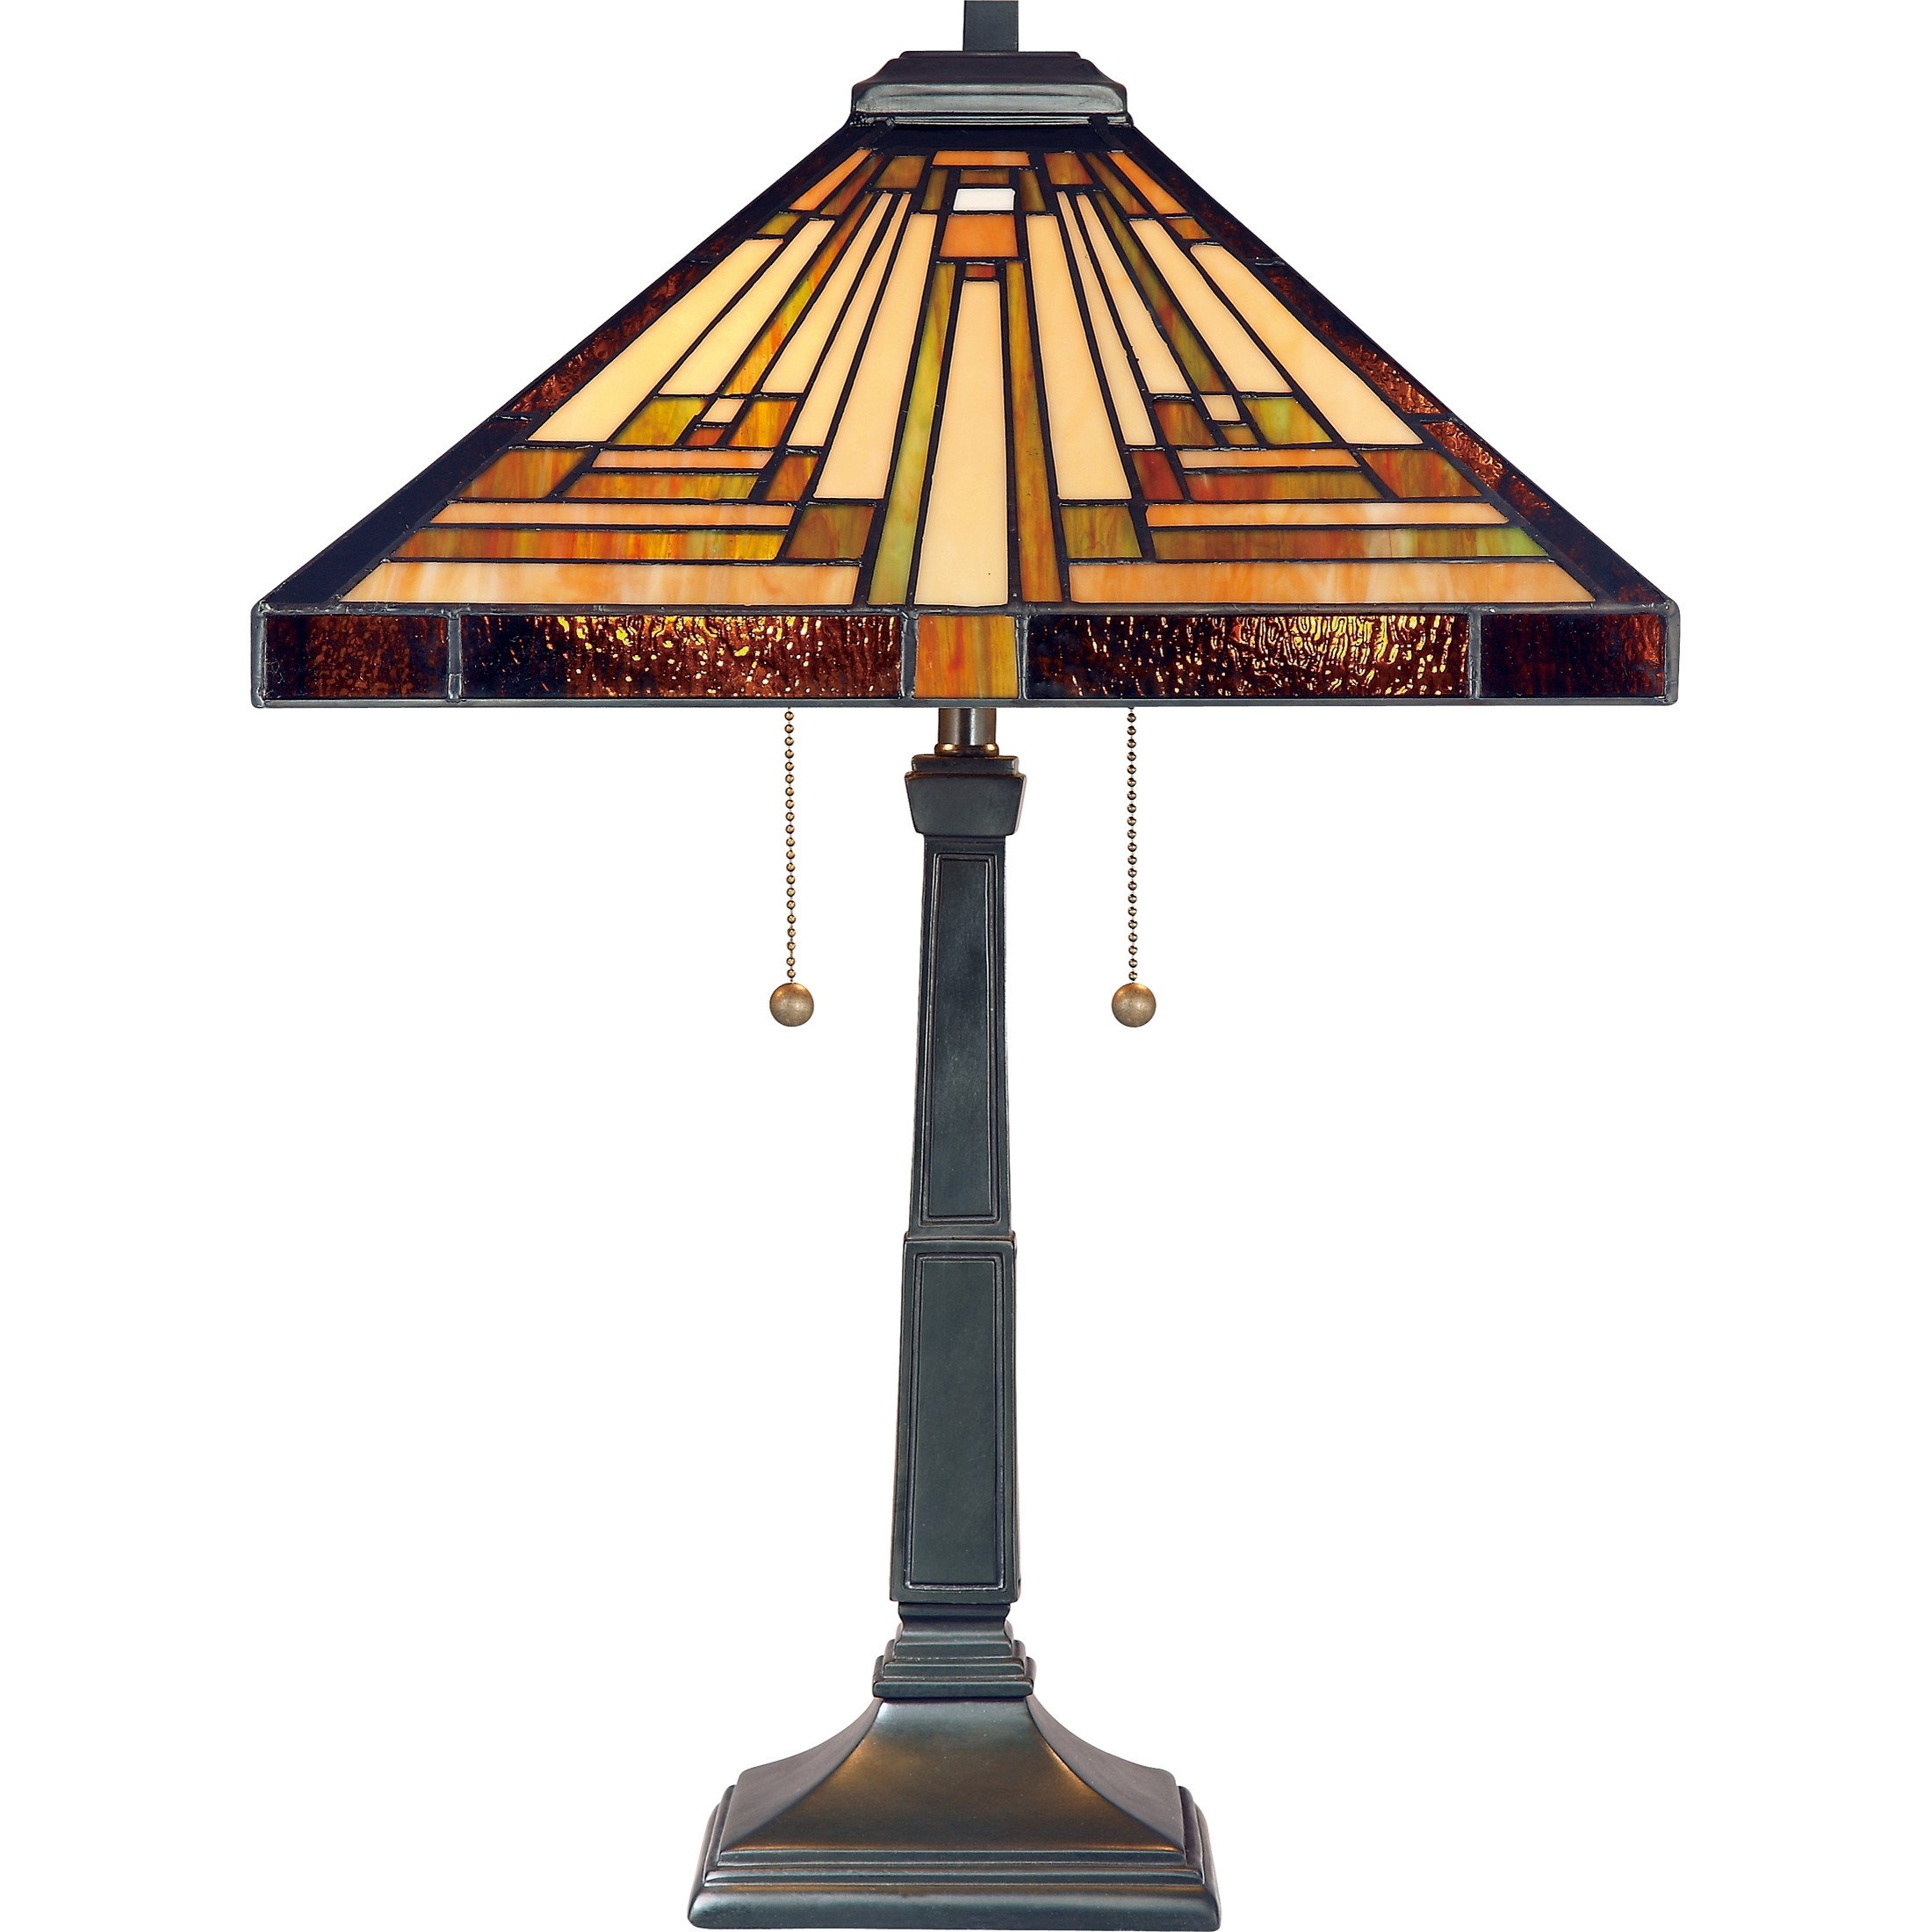 Stephen 23" H Table Lamp with Empire Shade